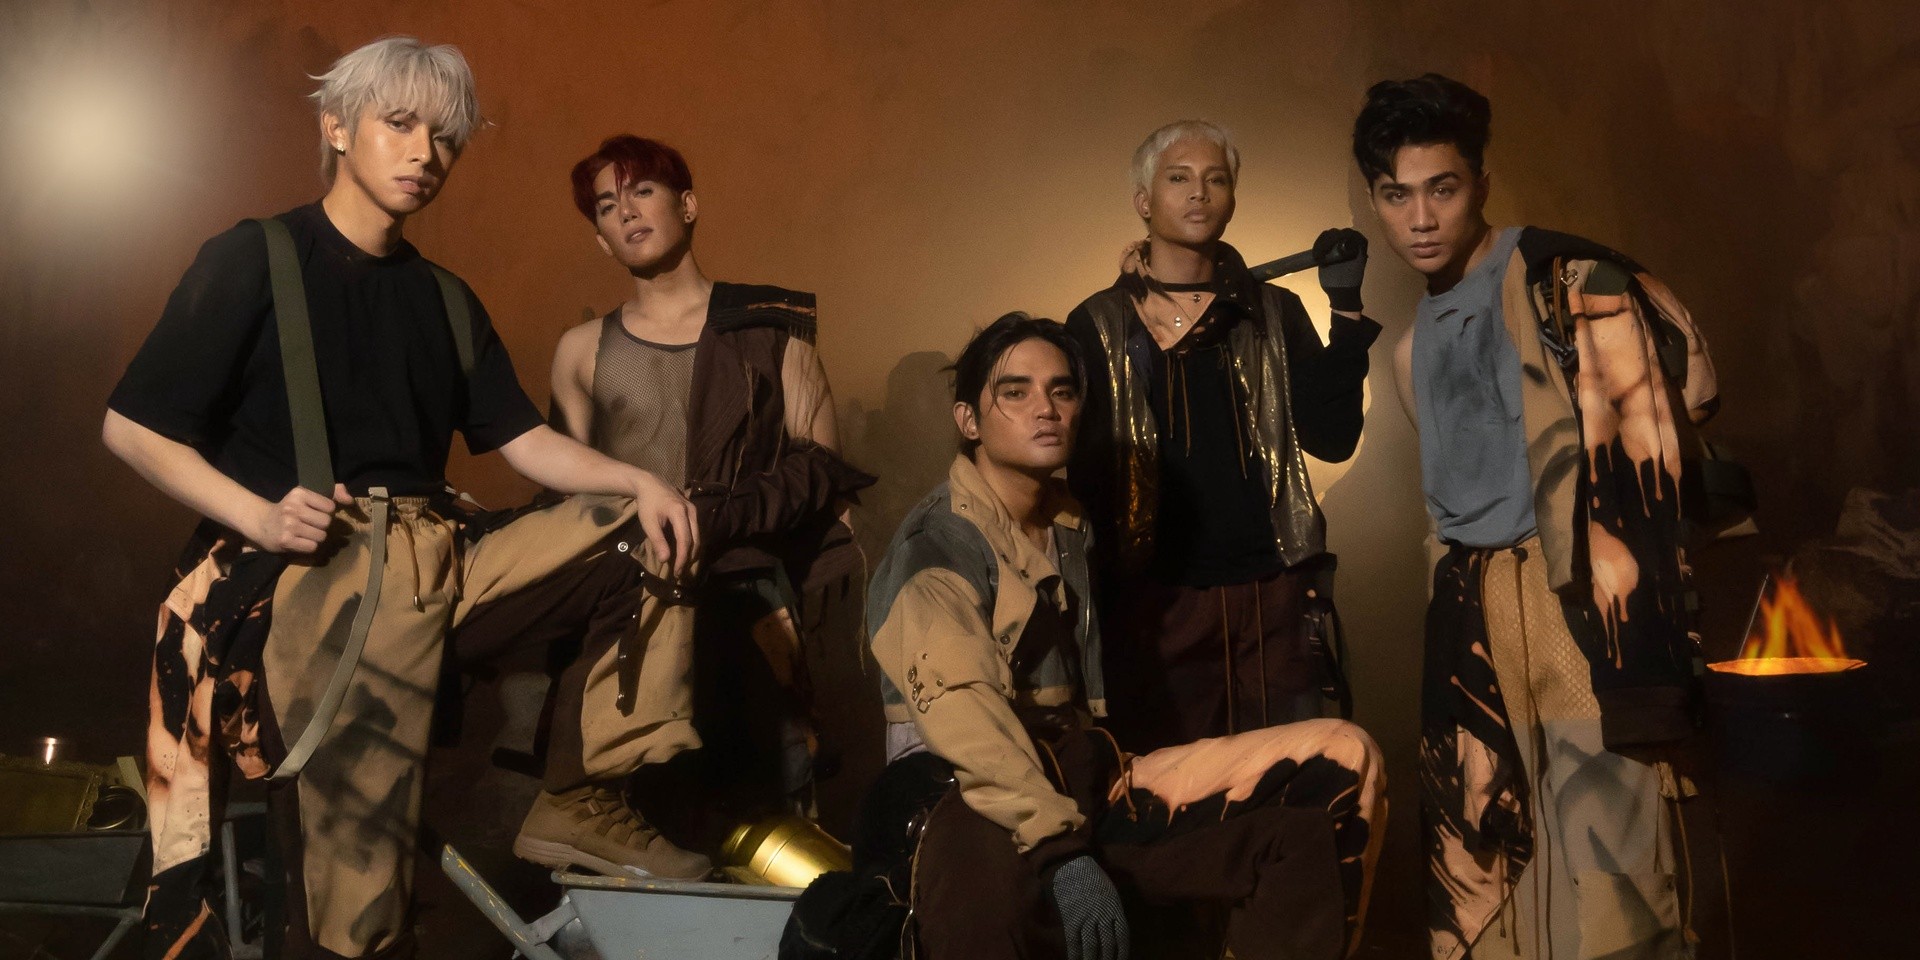 SB19 find gold in new single 'GENTO' — watch